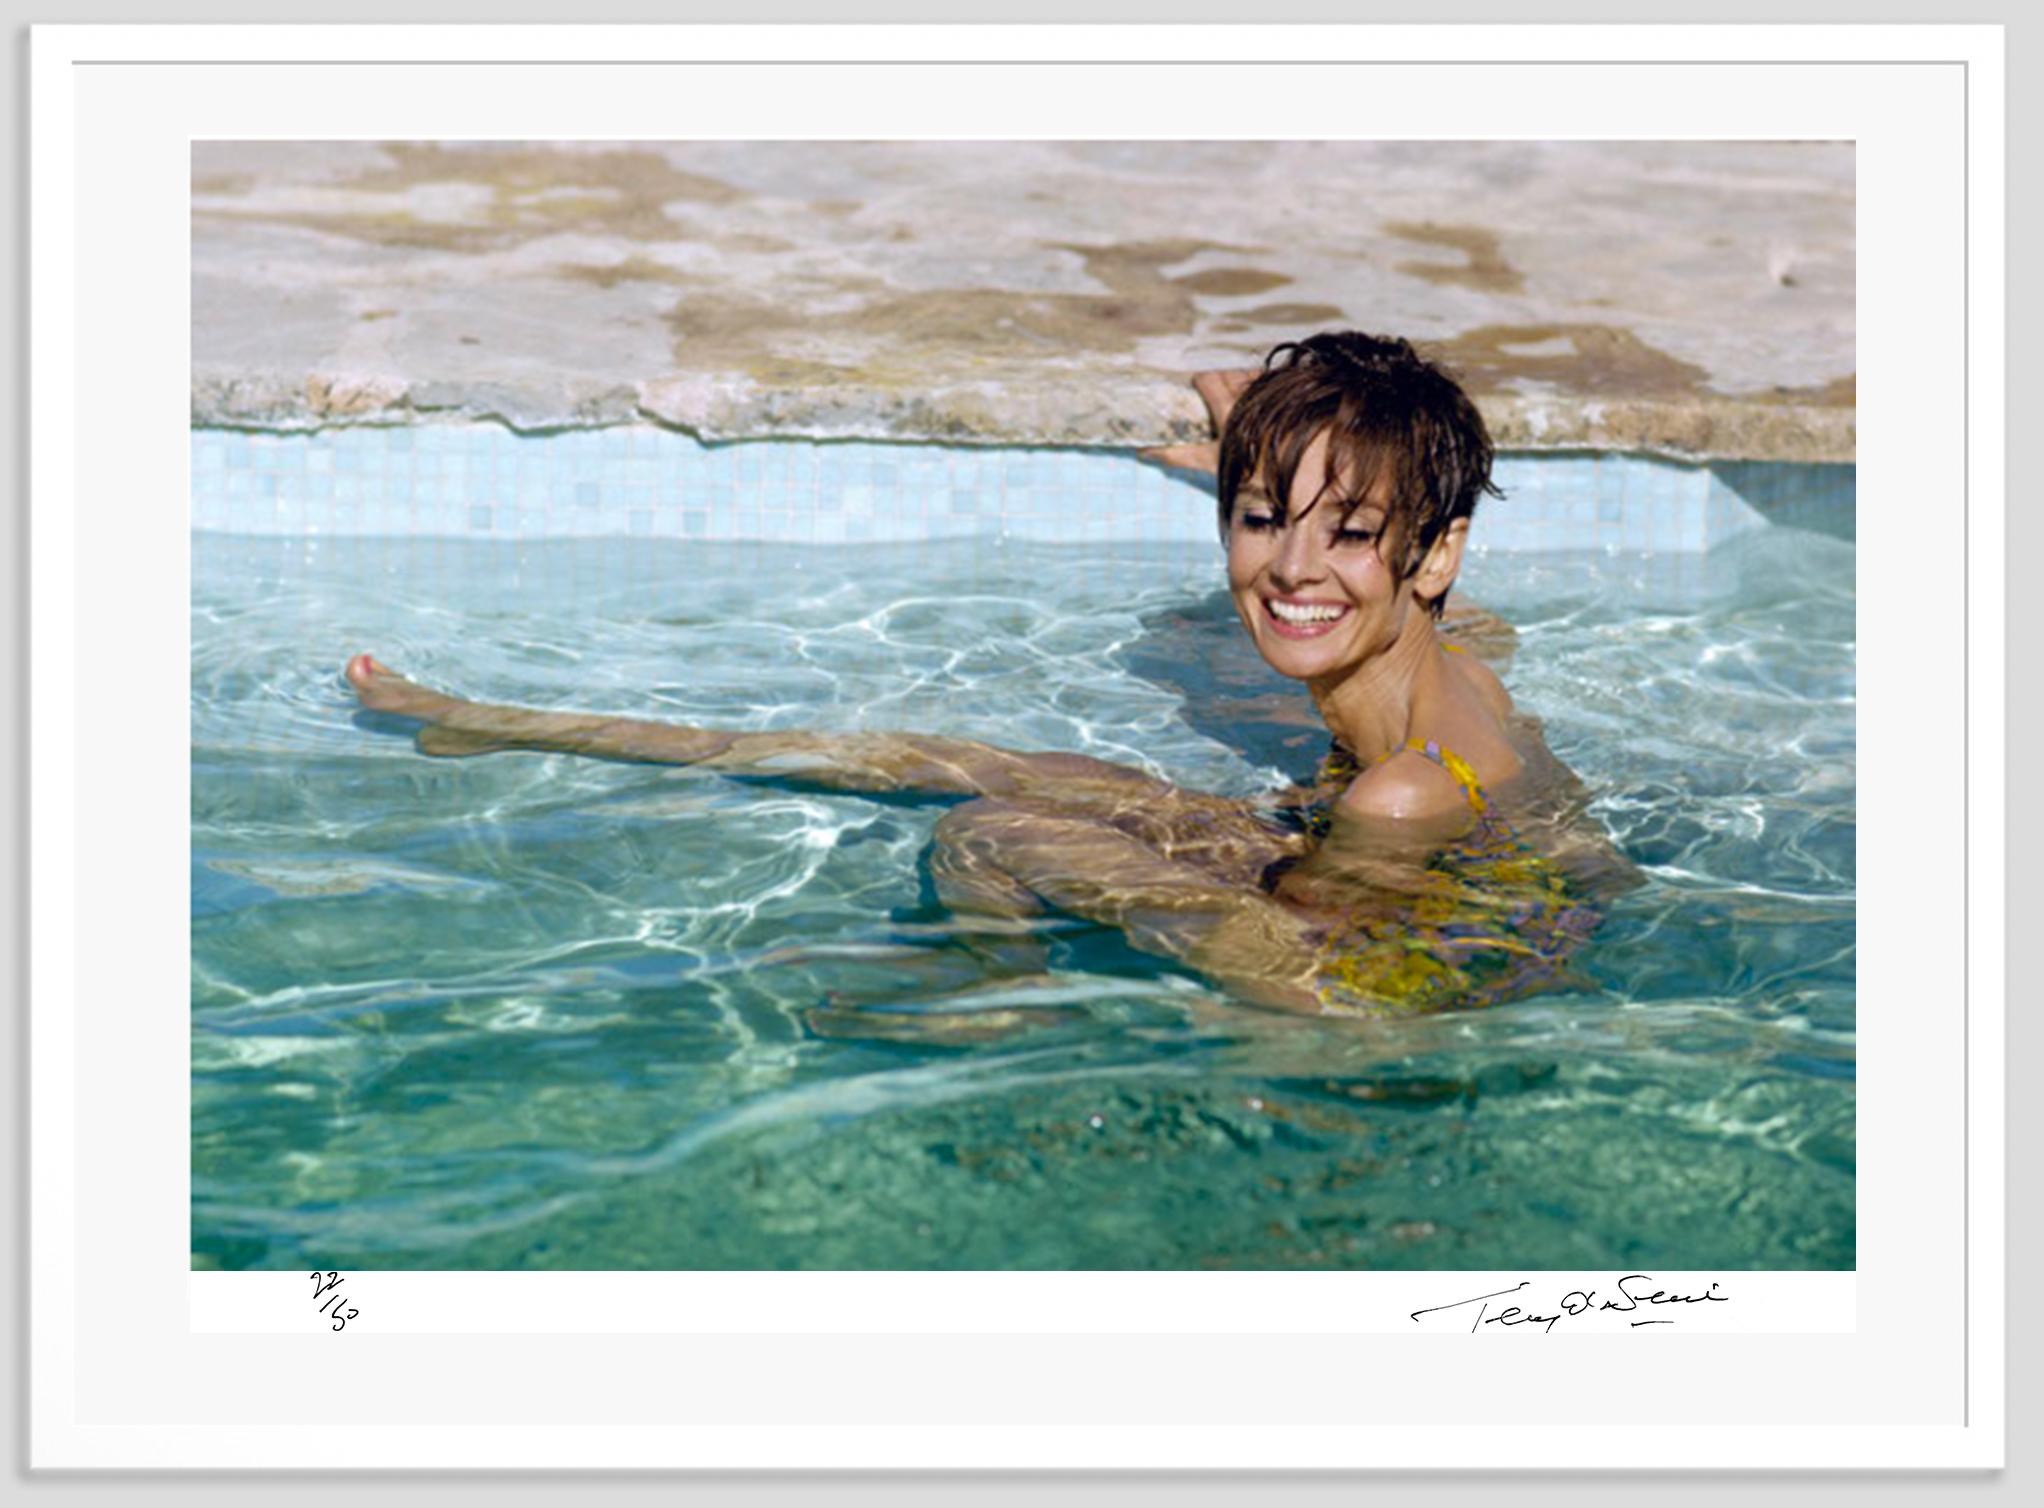 Audrey Hepburn in Pool 1966 (Framed) - Photograph by Terry O'Neill